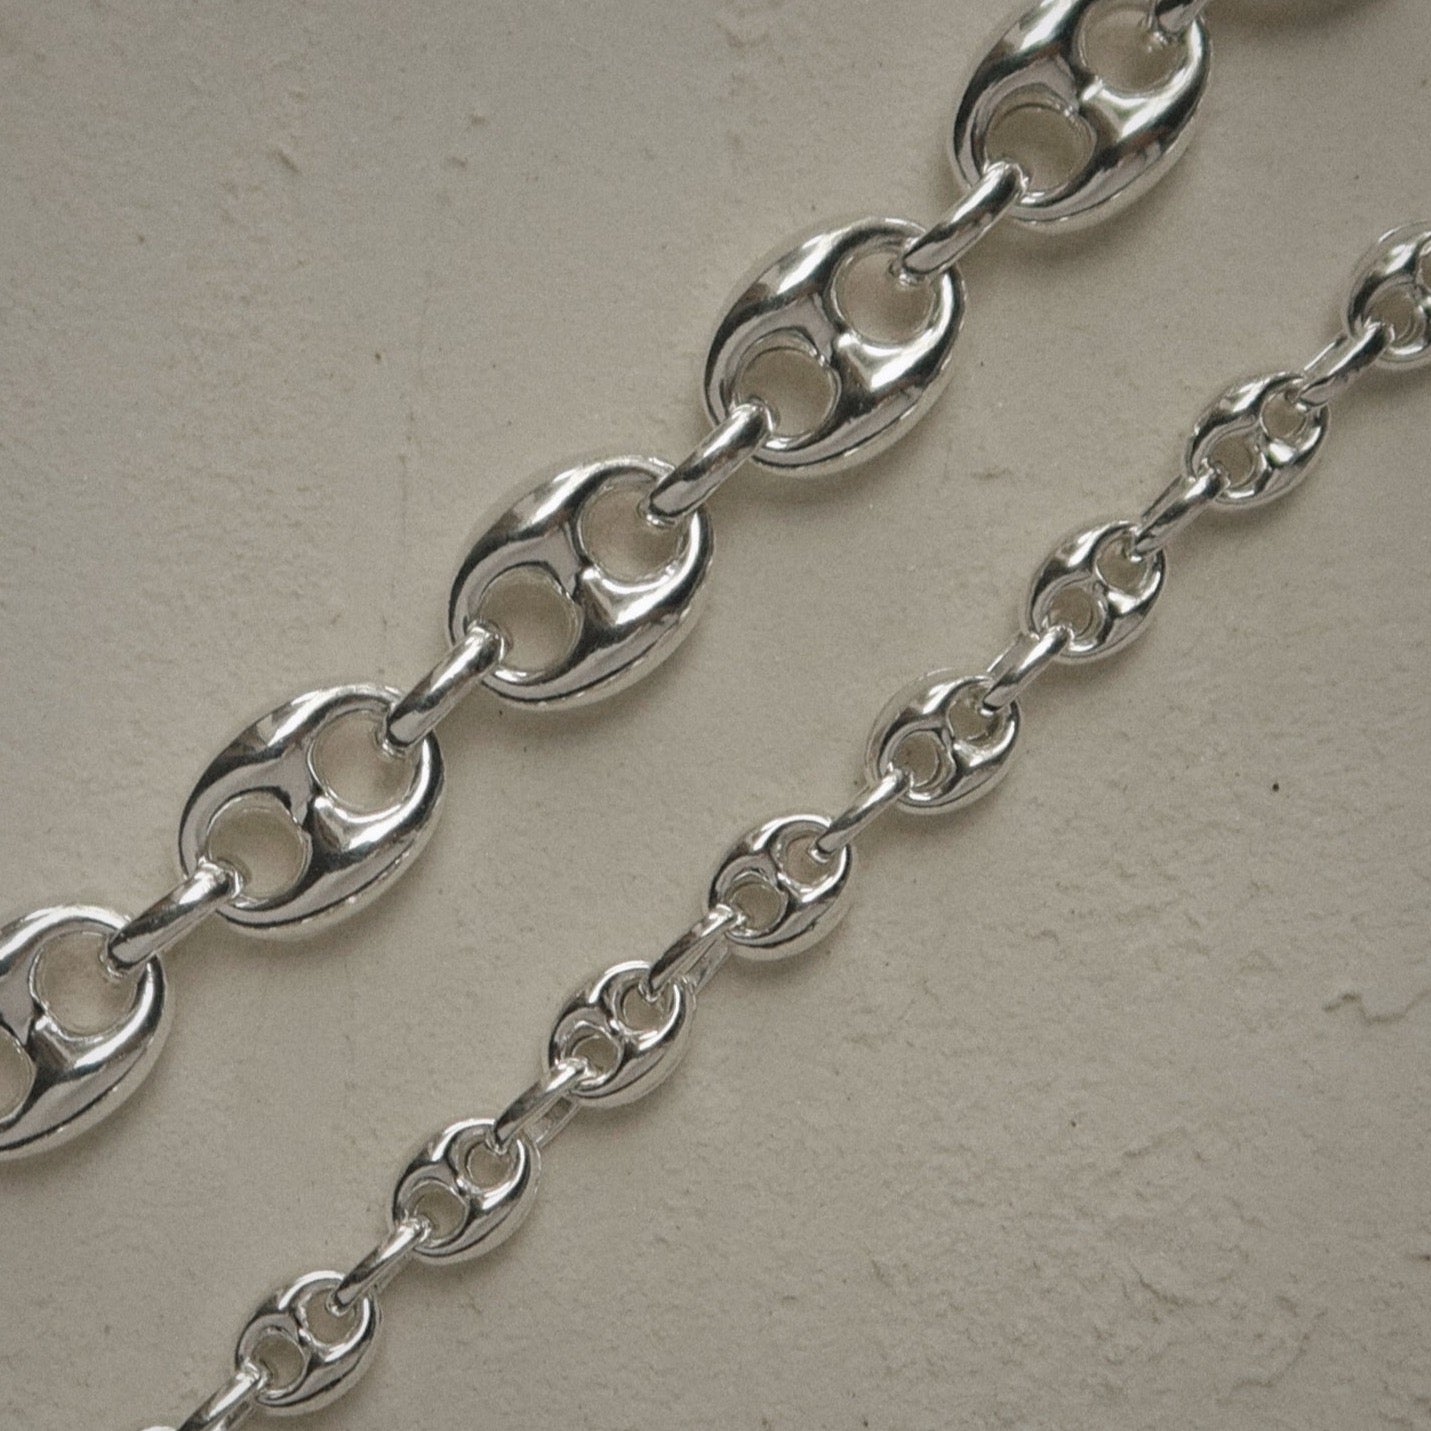 XL Puffy Mariner Chain Necklace